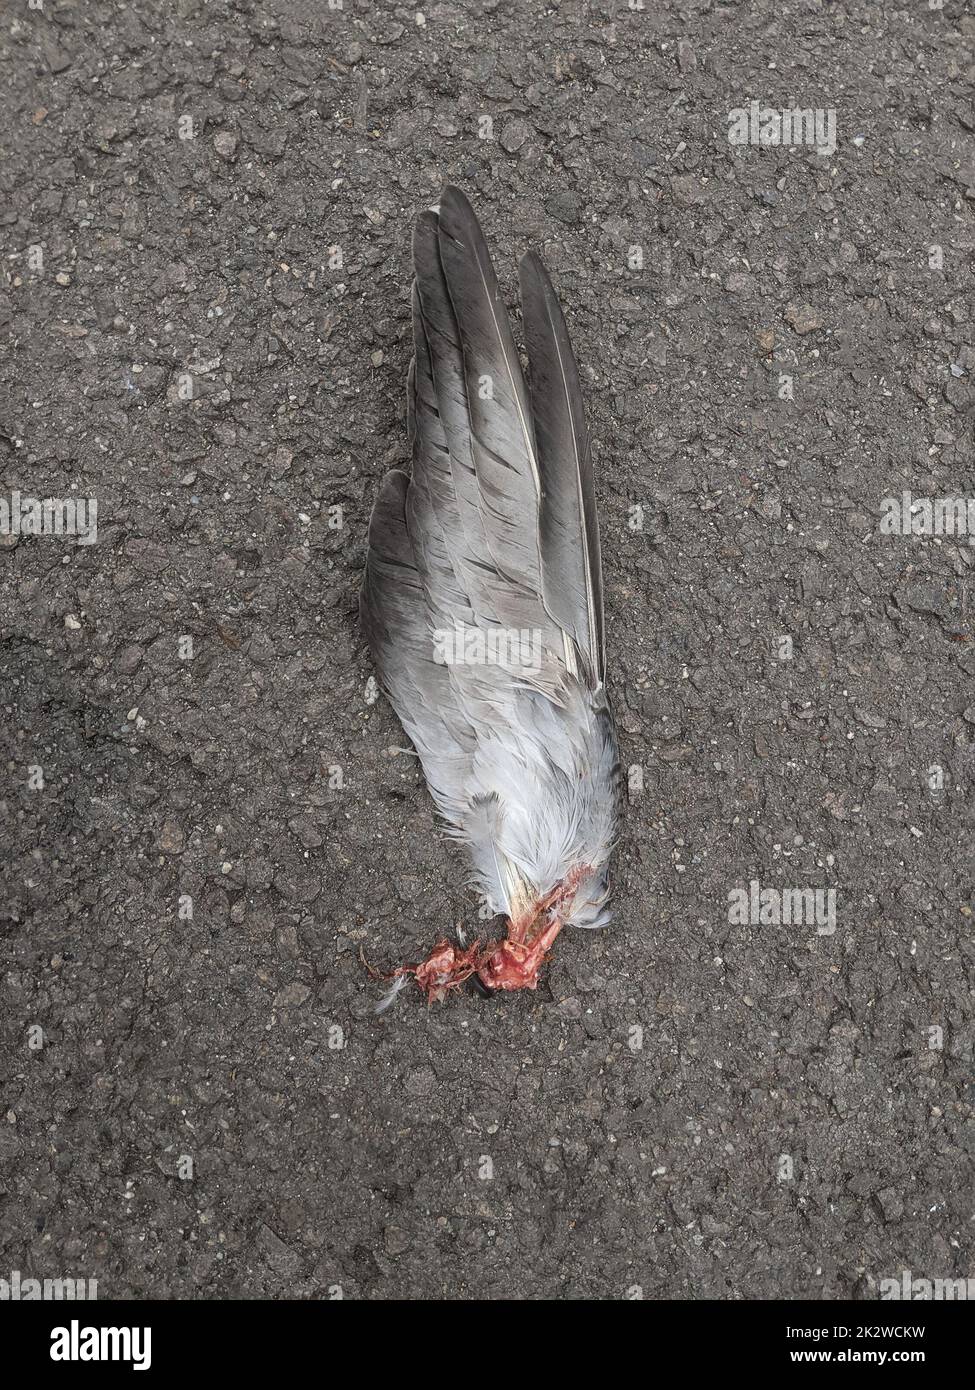 feathered wing remains of a dead grey pigeon on the sidewalk Stock Photo